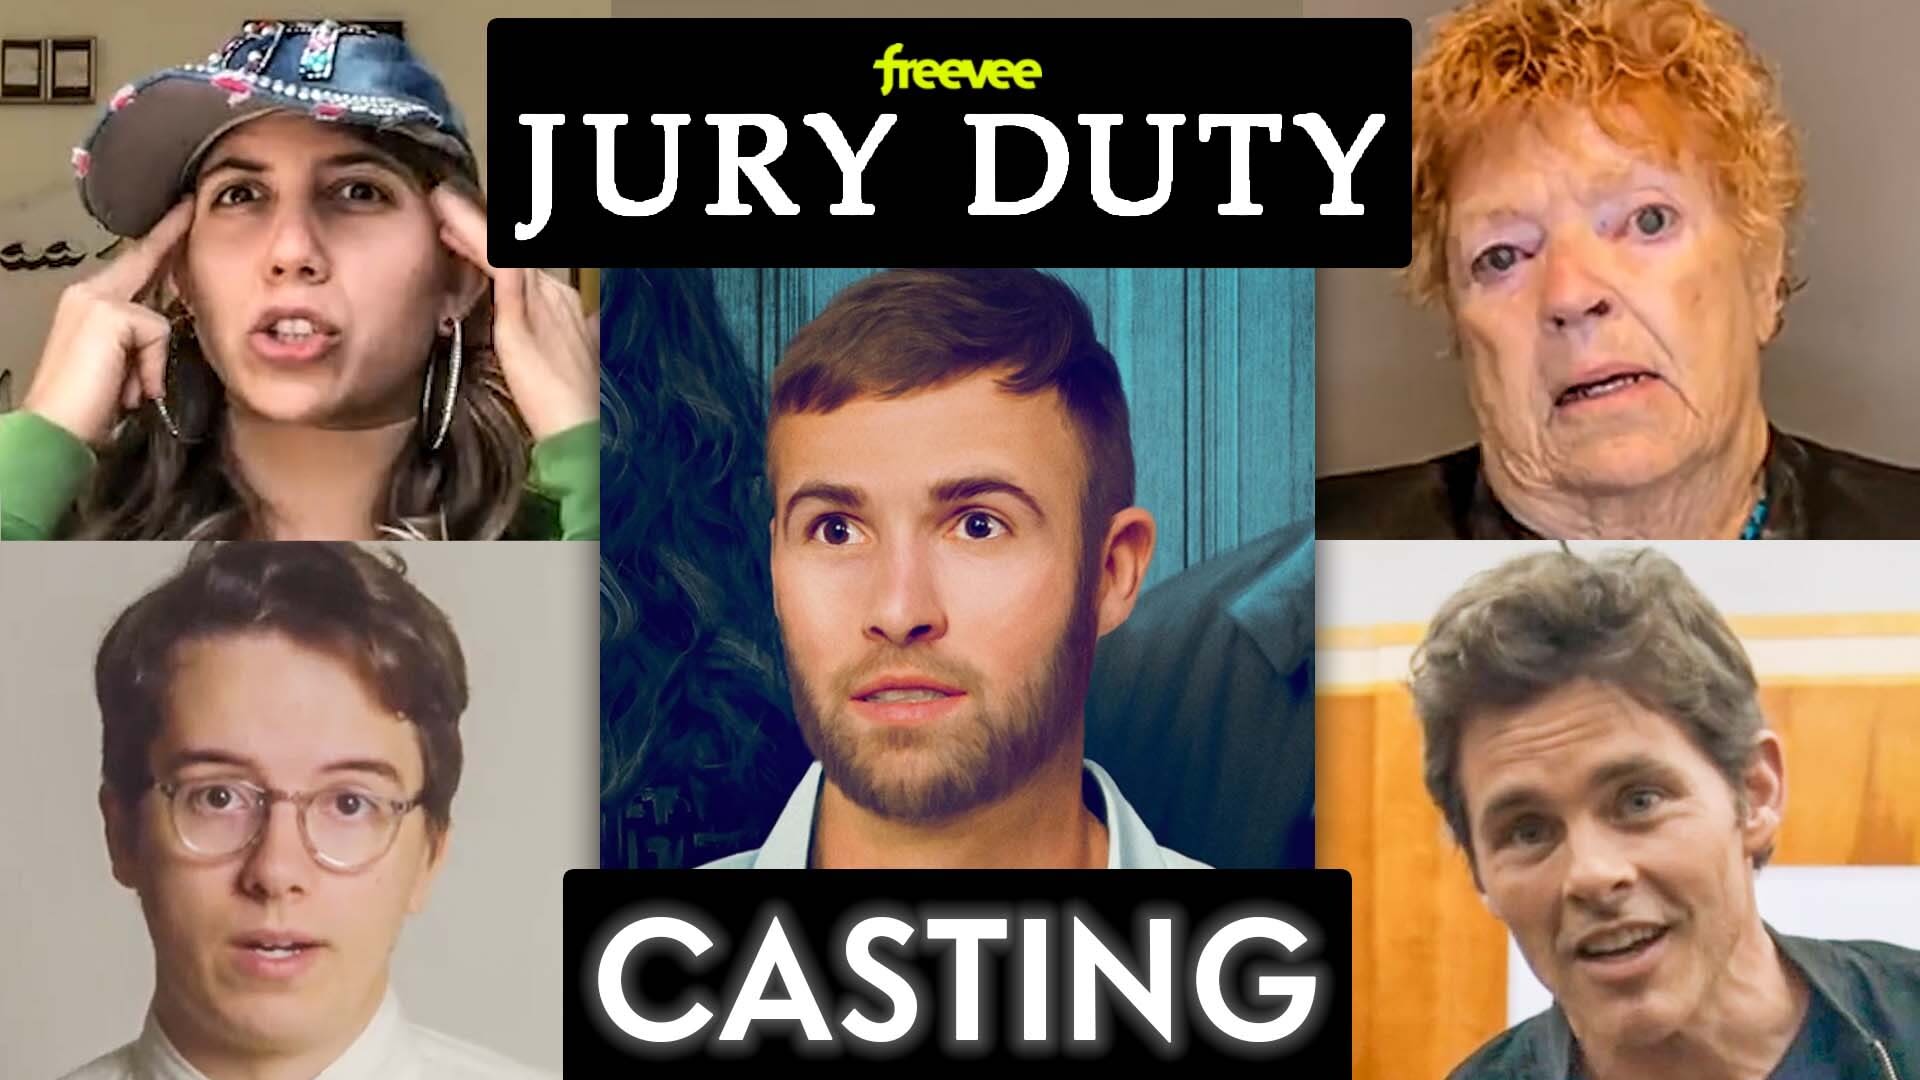 Watch 'Jury Duty' Auditions and How the Cast Landed Their Roles